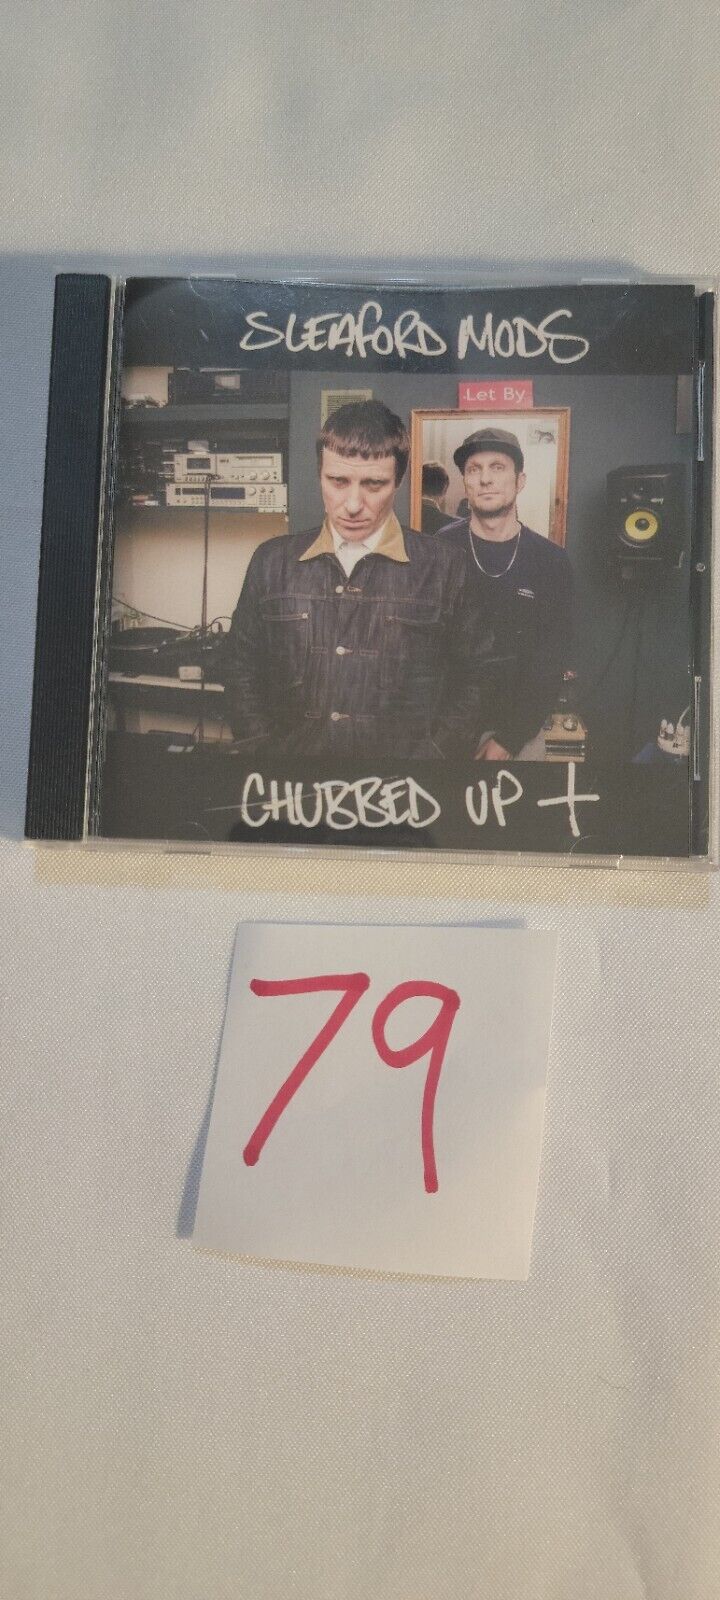 SLEAFORD MODS - Chubbed Up+ - CD - RARE HTF OOP